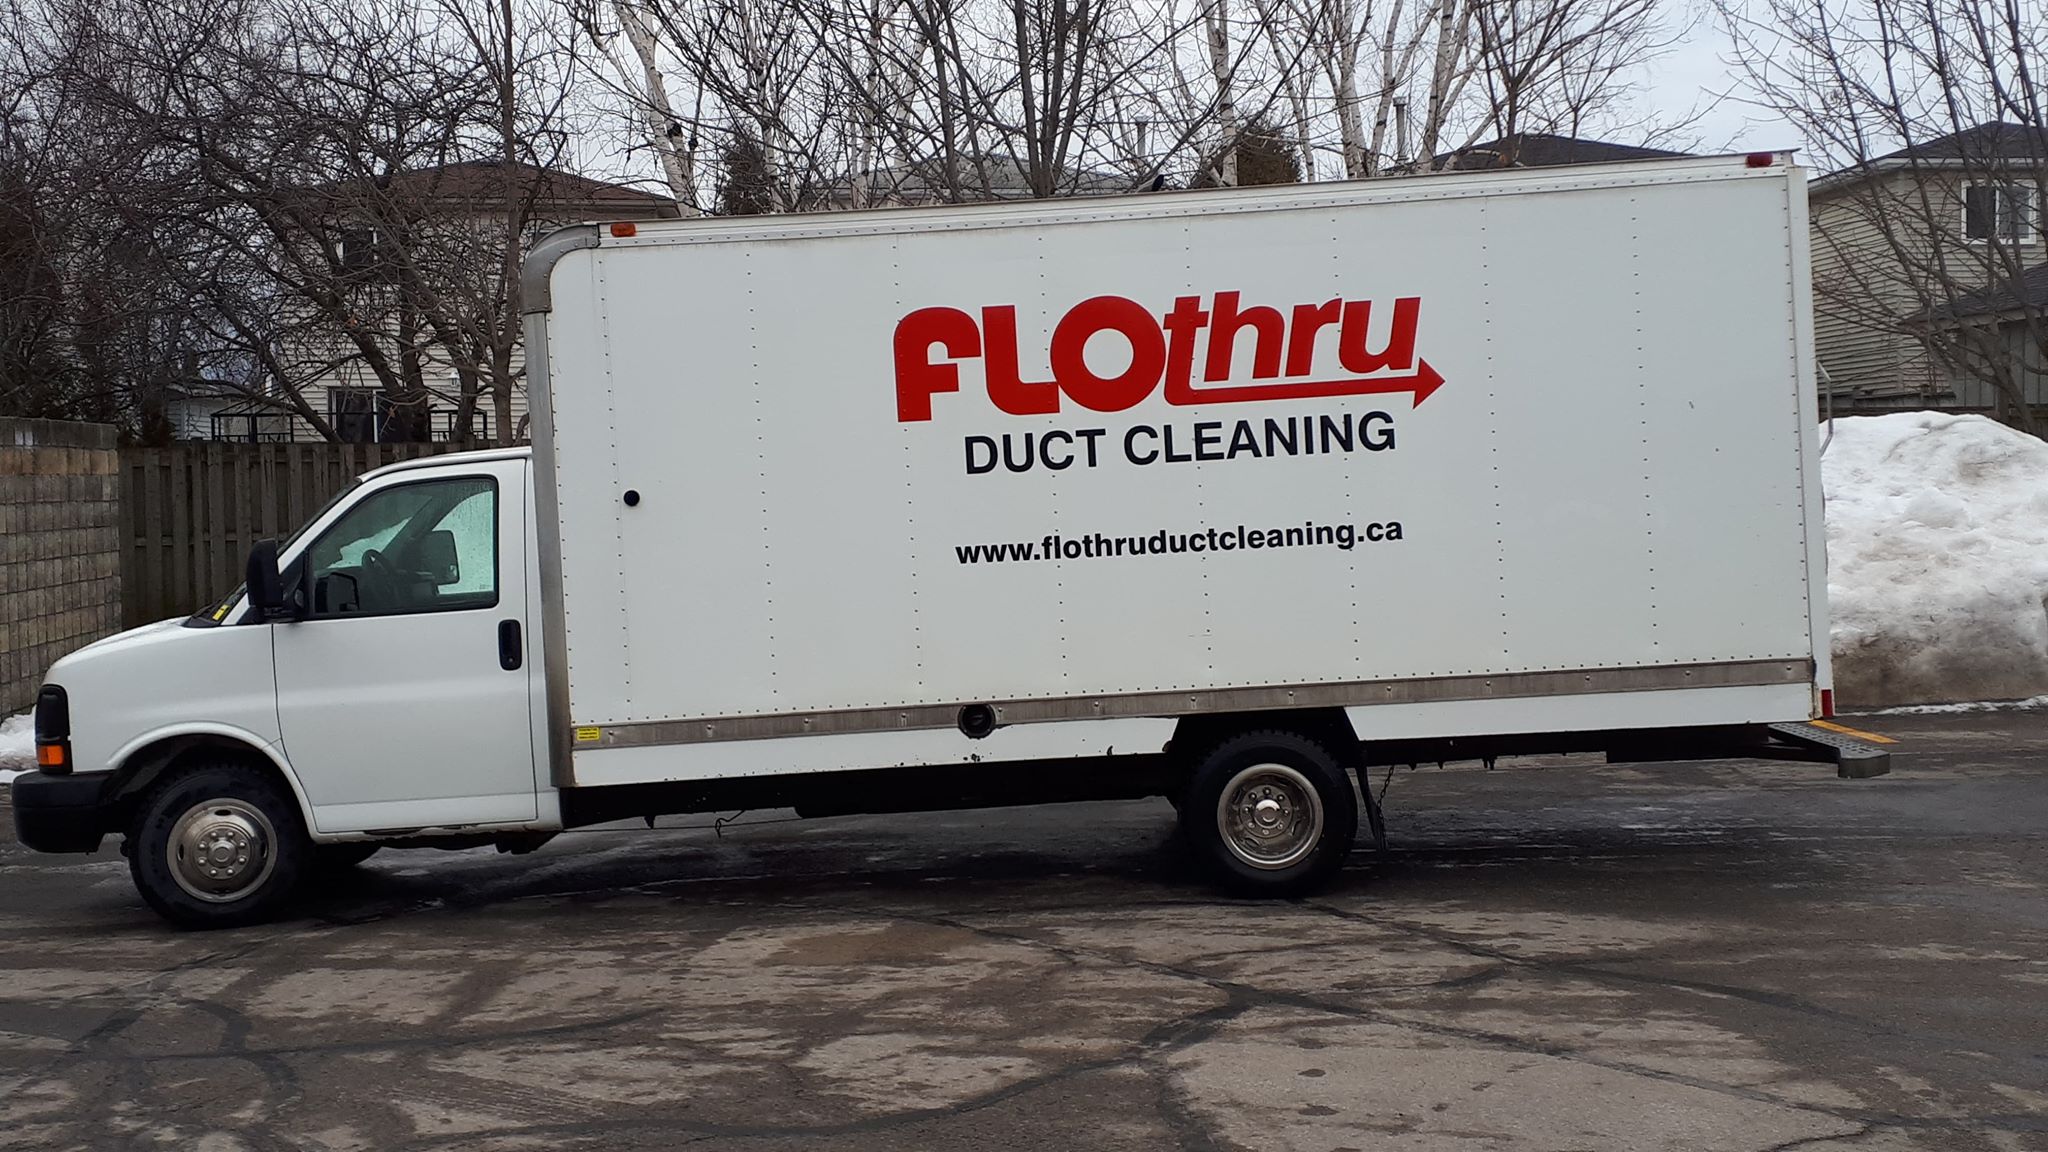 flothru duct cleaning truck mount